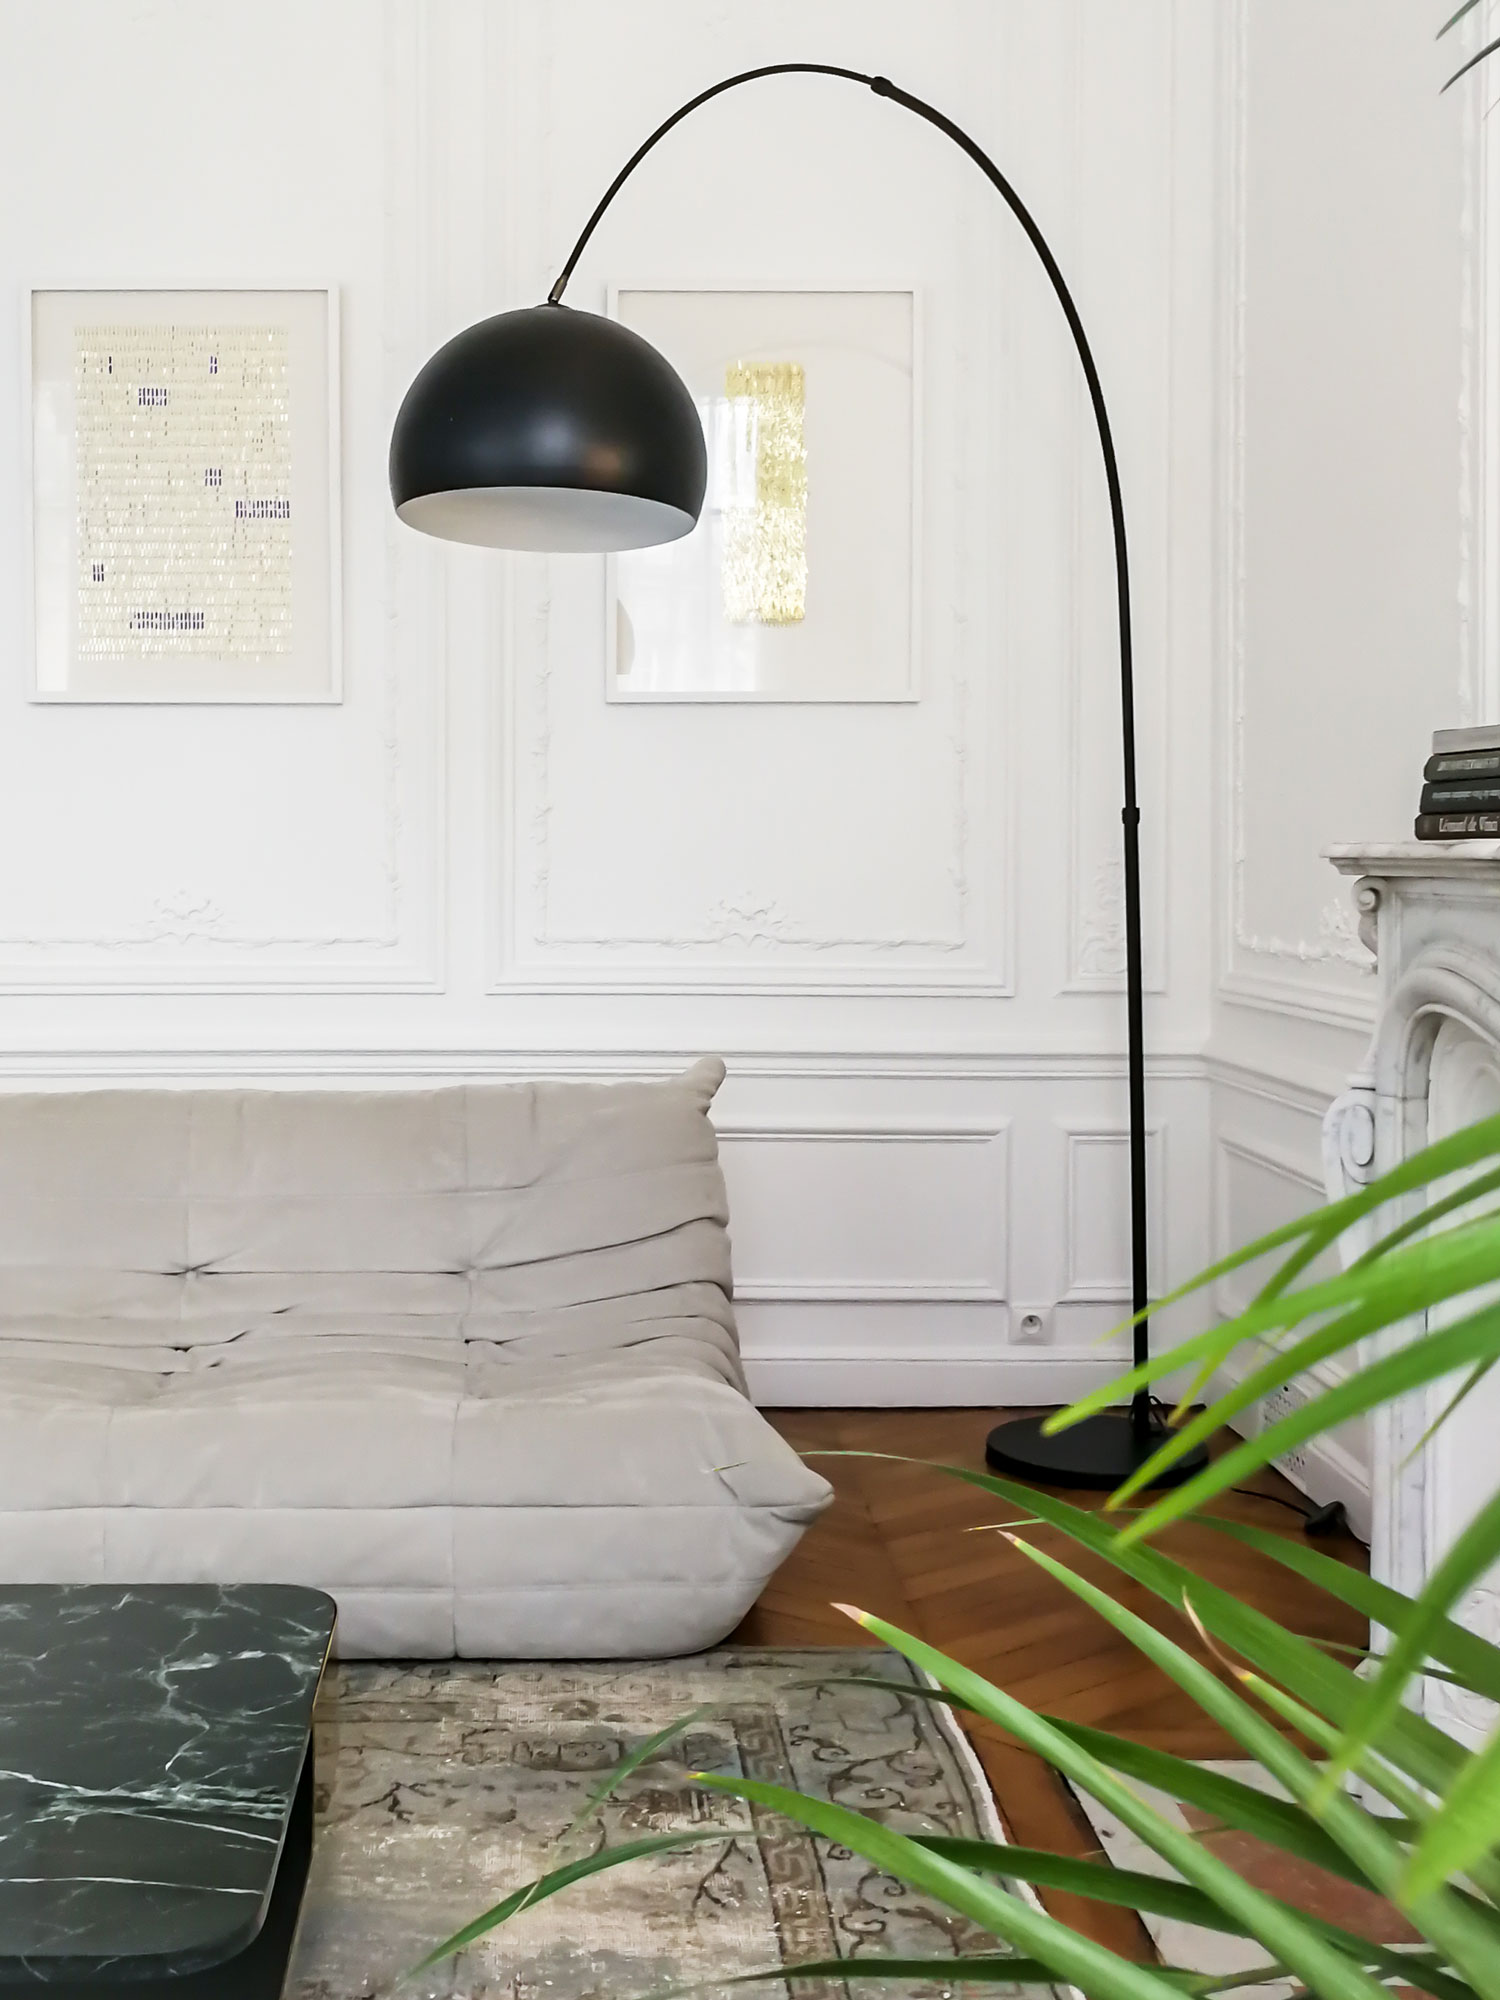 Discover Design And Collectibles In This Understated Luxury Parisian Interior